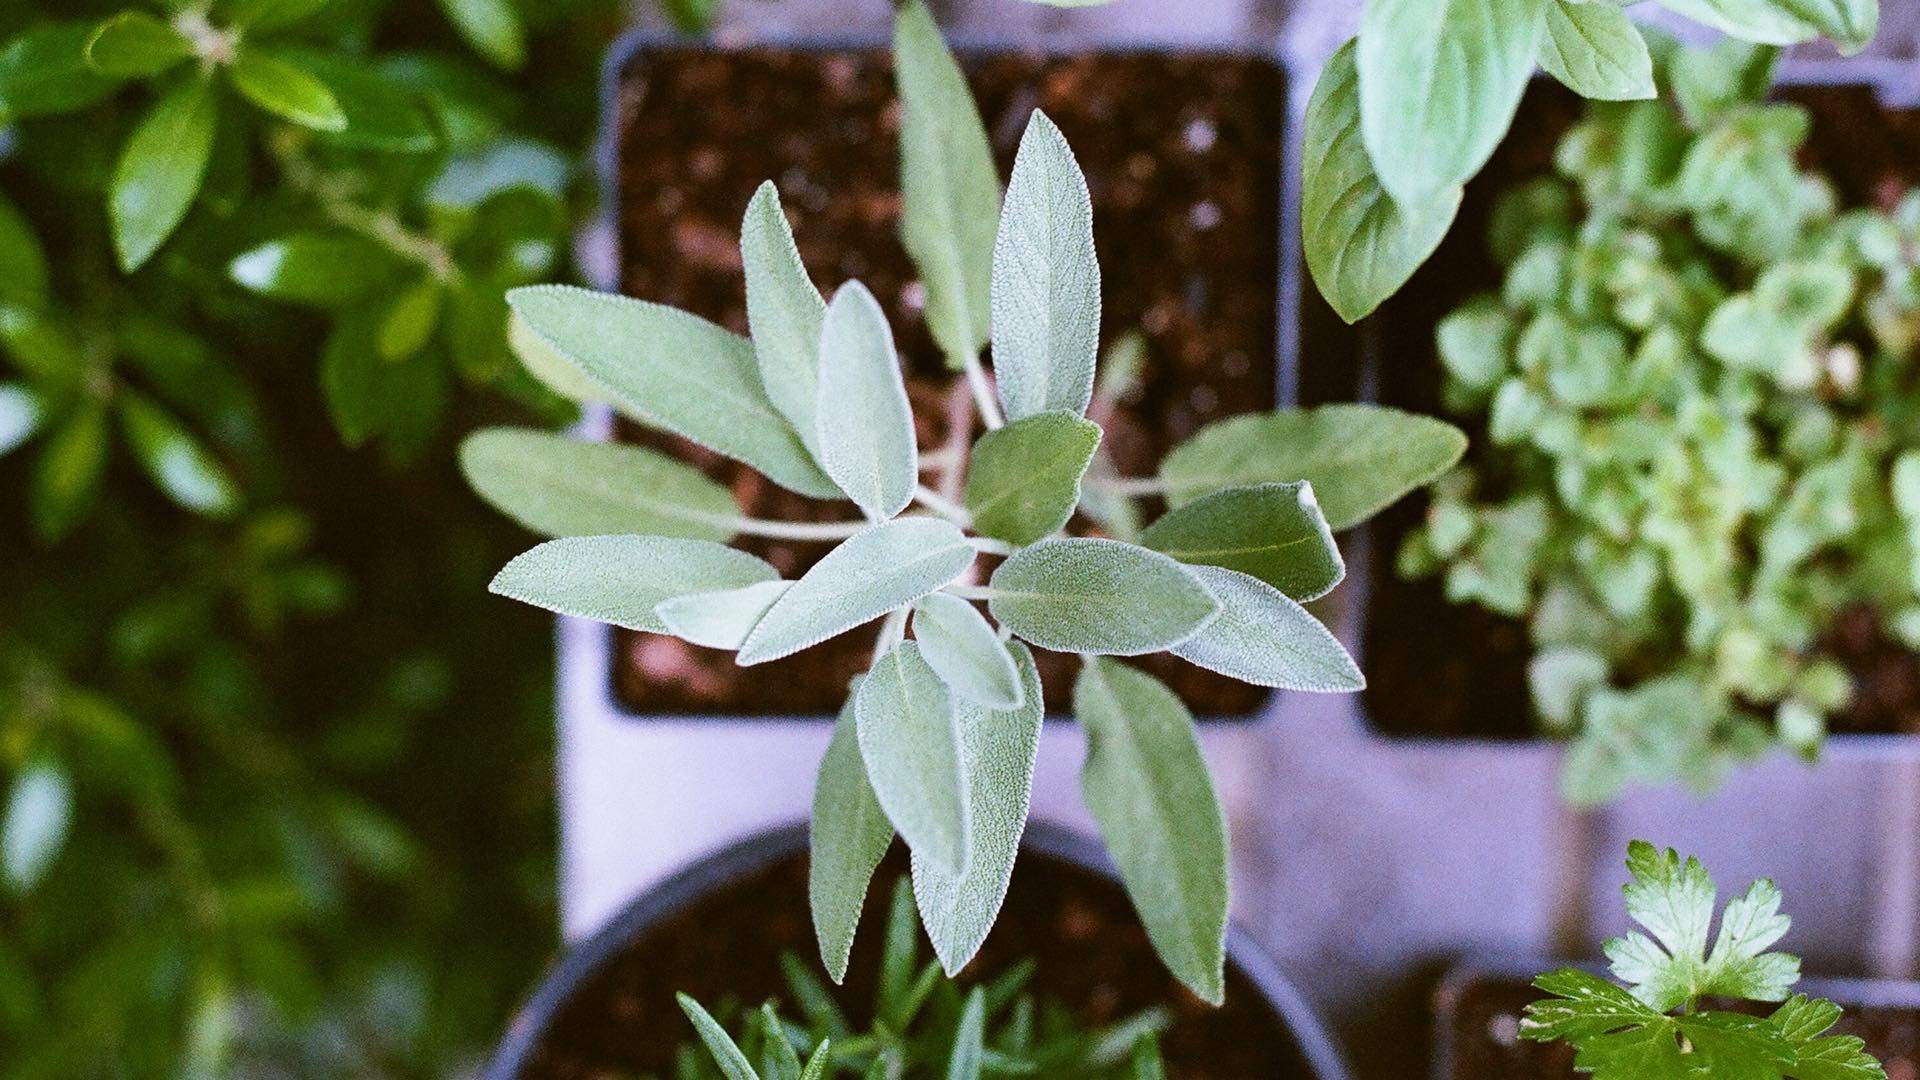 Stock Up on Herbs at the Epicurious Garden